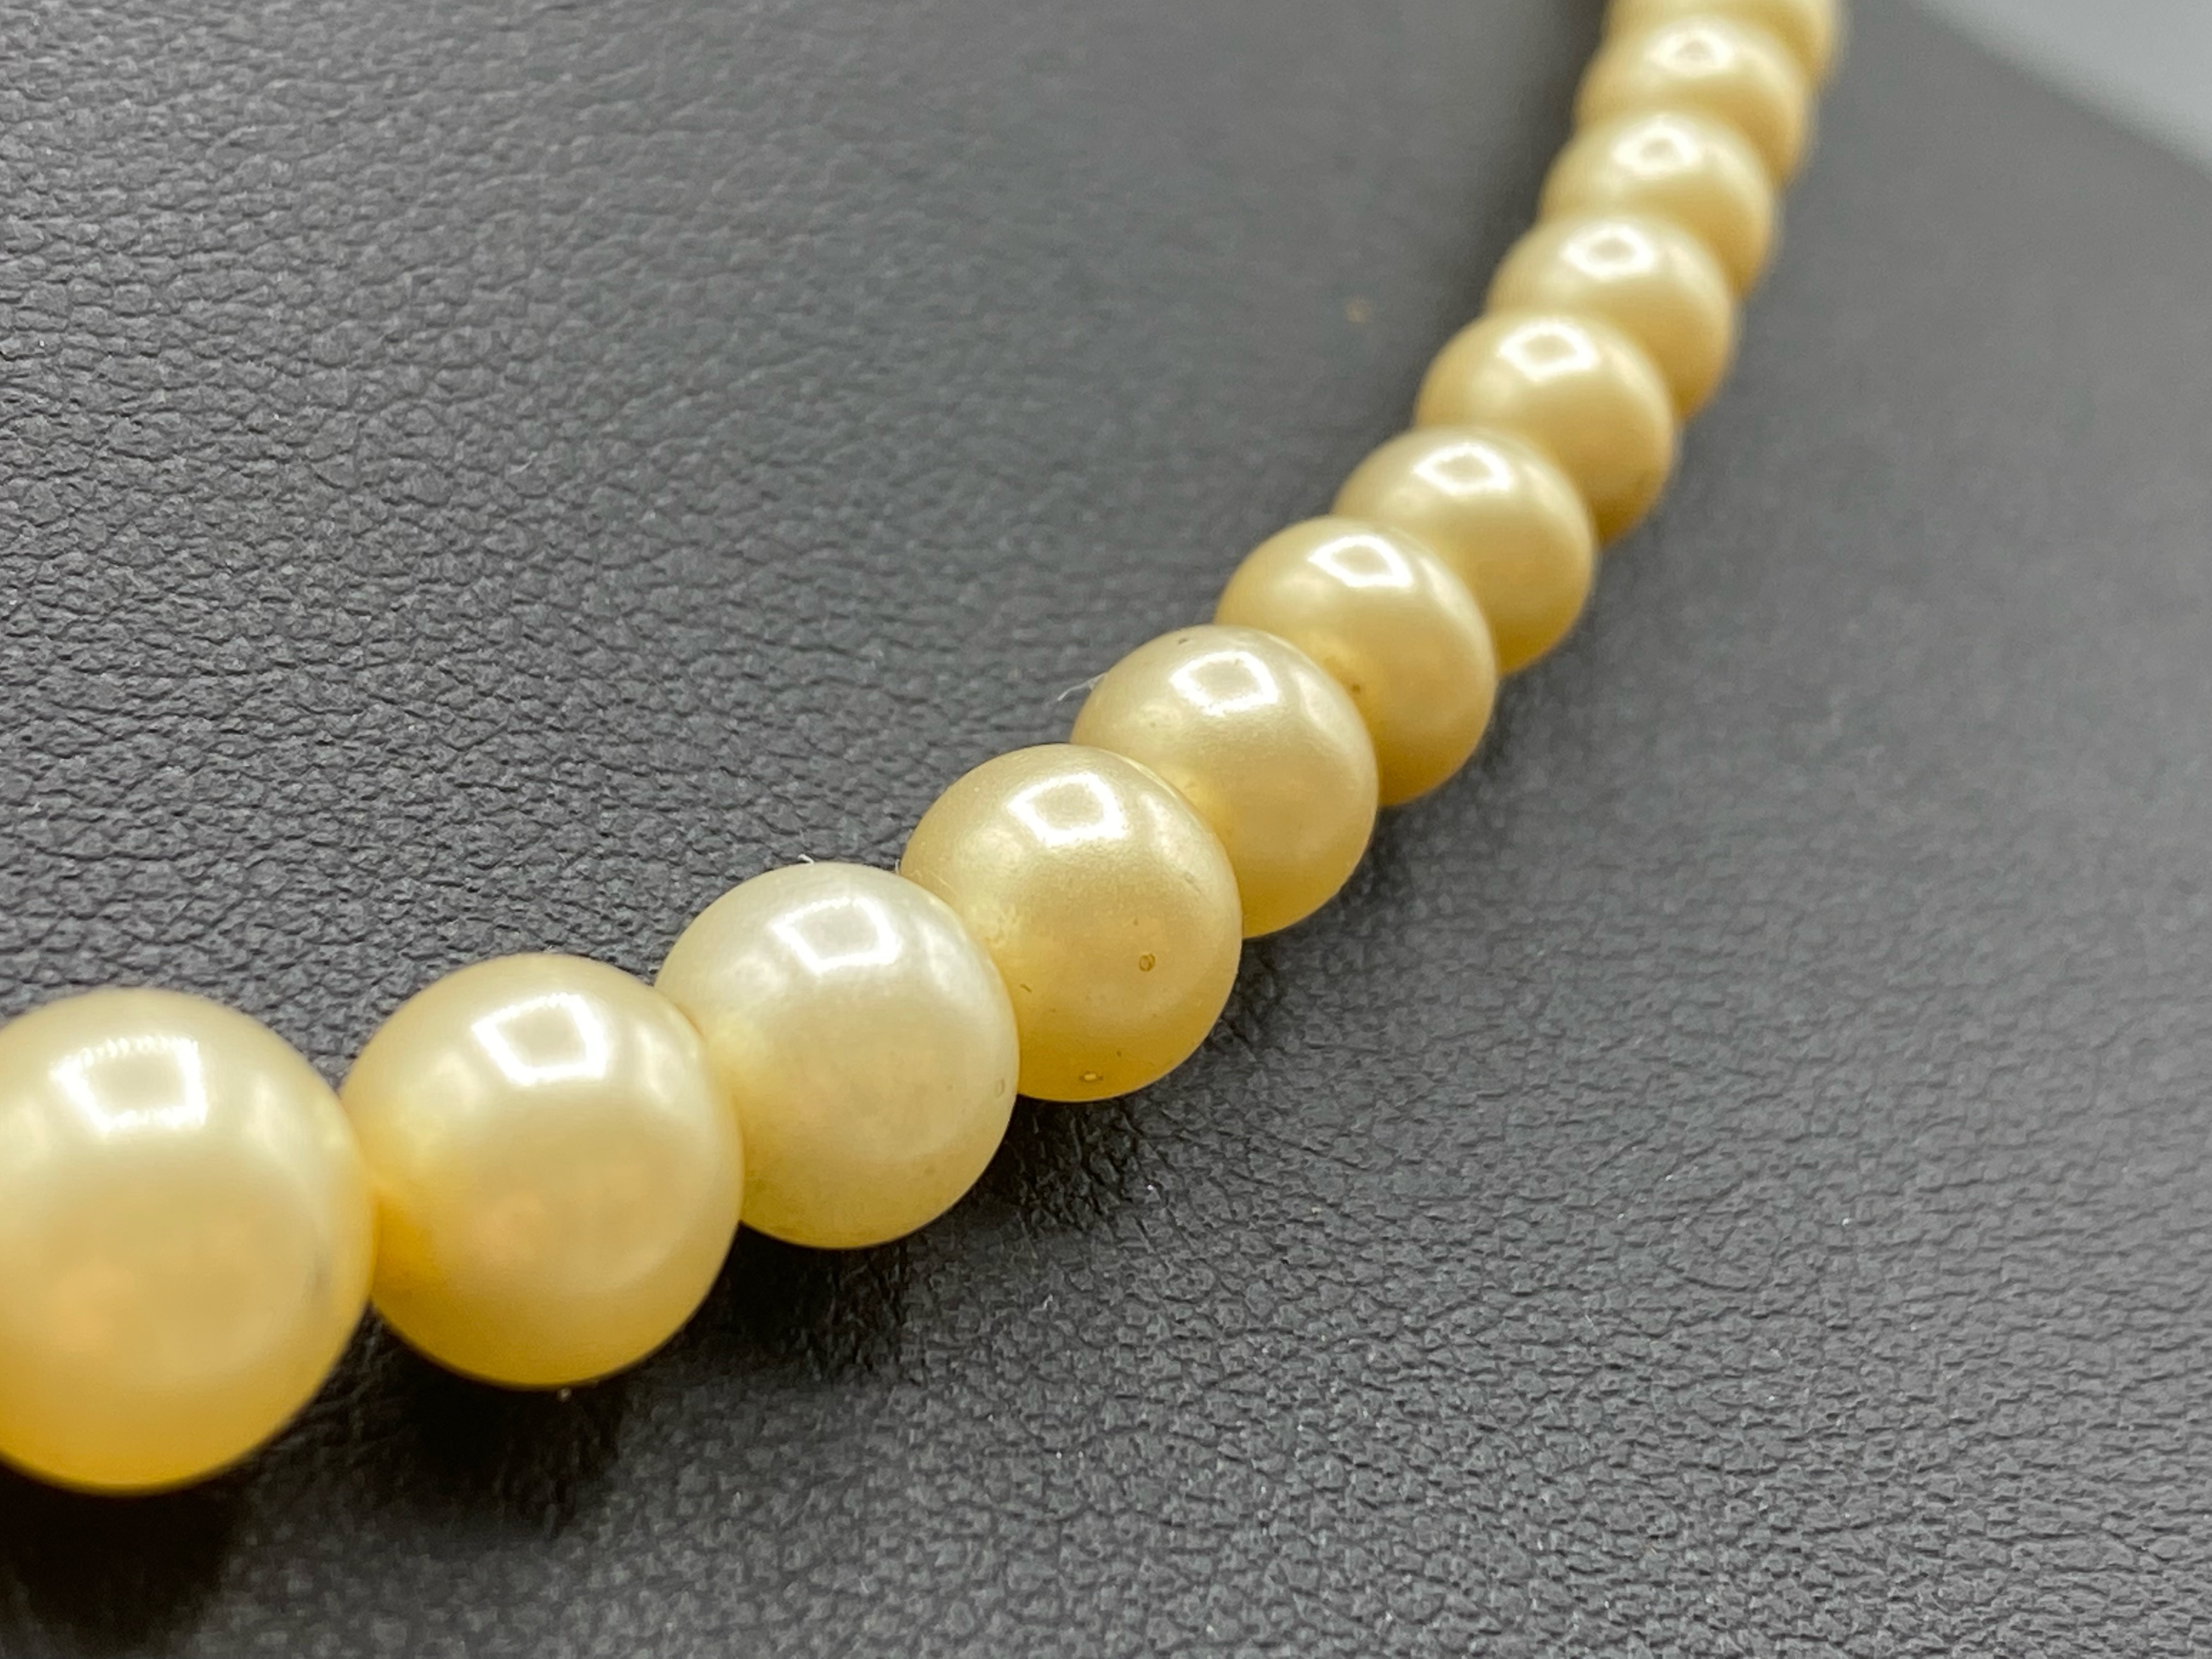 Antique Edwardian Pearl Necklace with 9ct Gold Clasp 63cm in length - Image 4 of 4